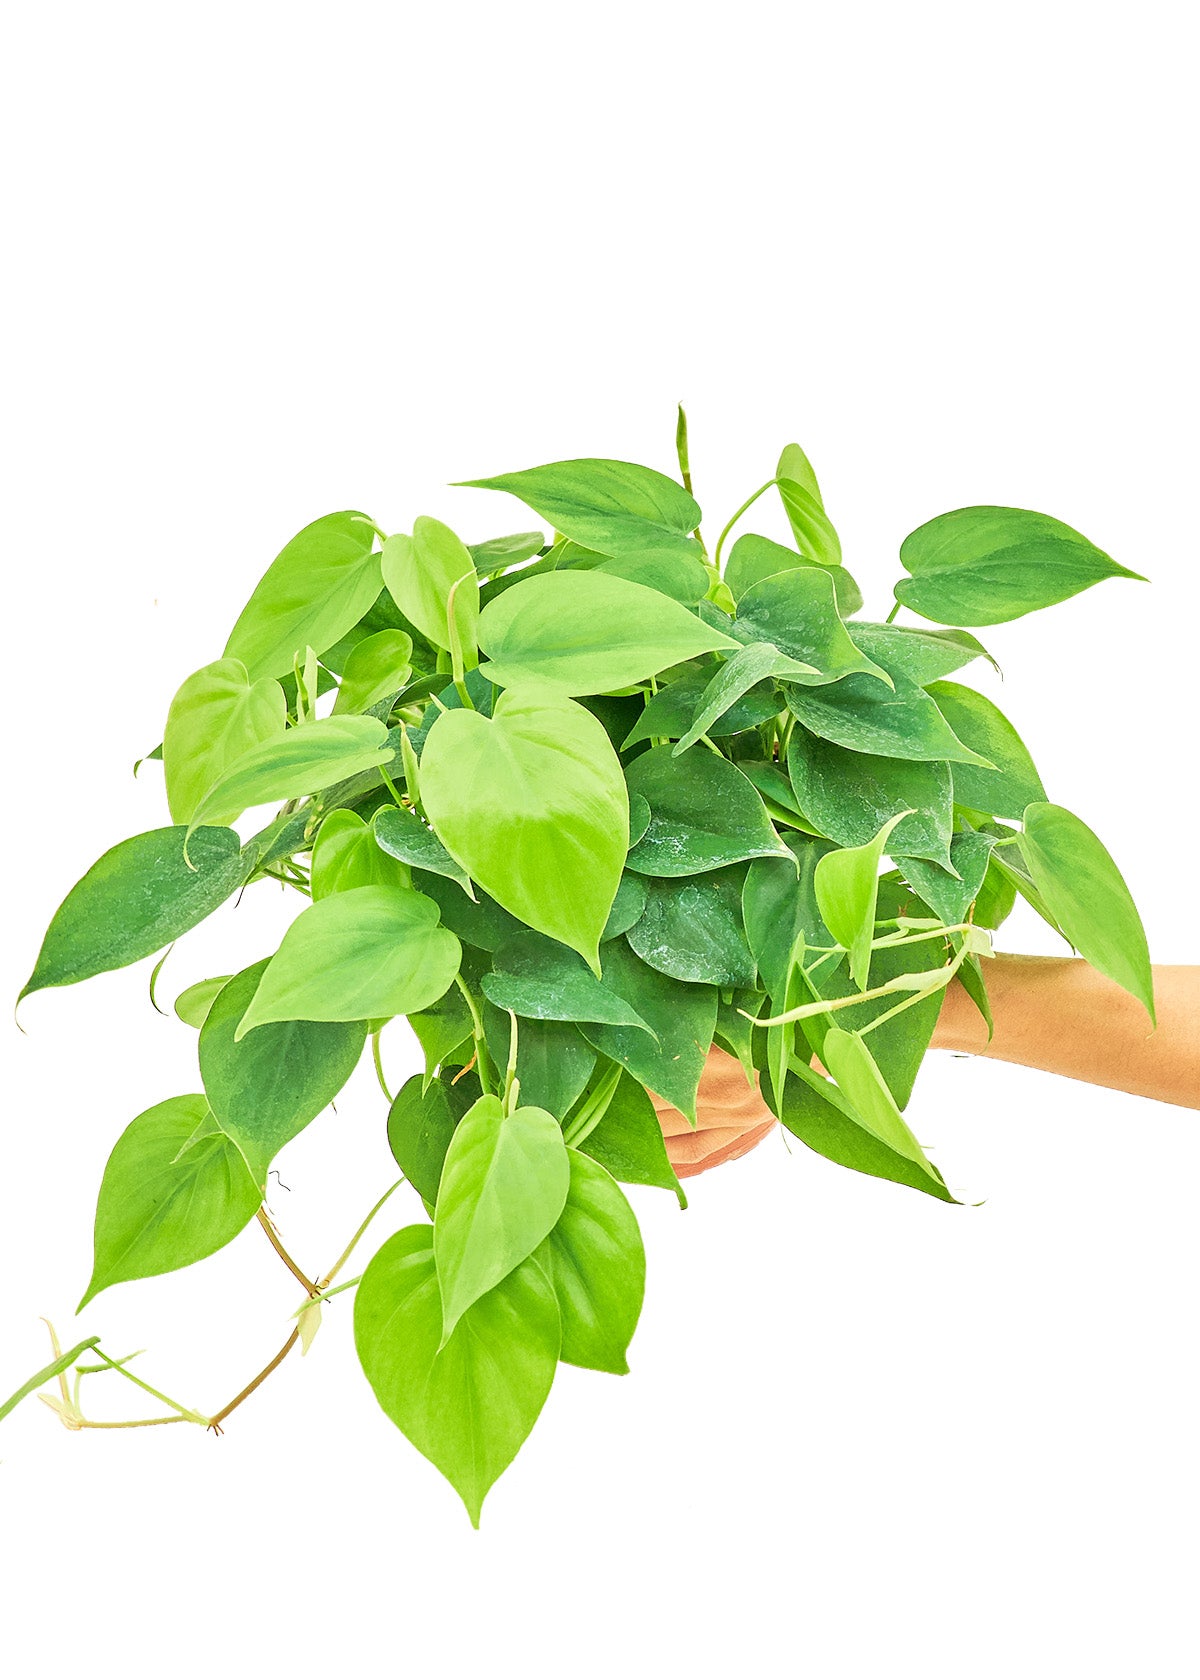 Medium size Sweetheart Philodendron Plant in a growers pot with a white background with a hand holding the pot showing the top view